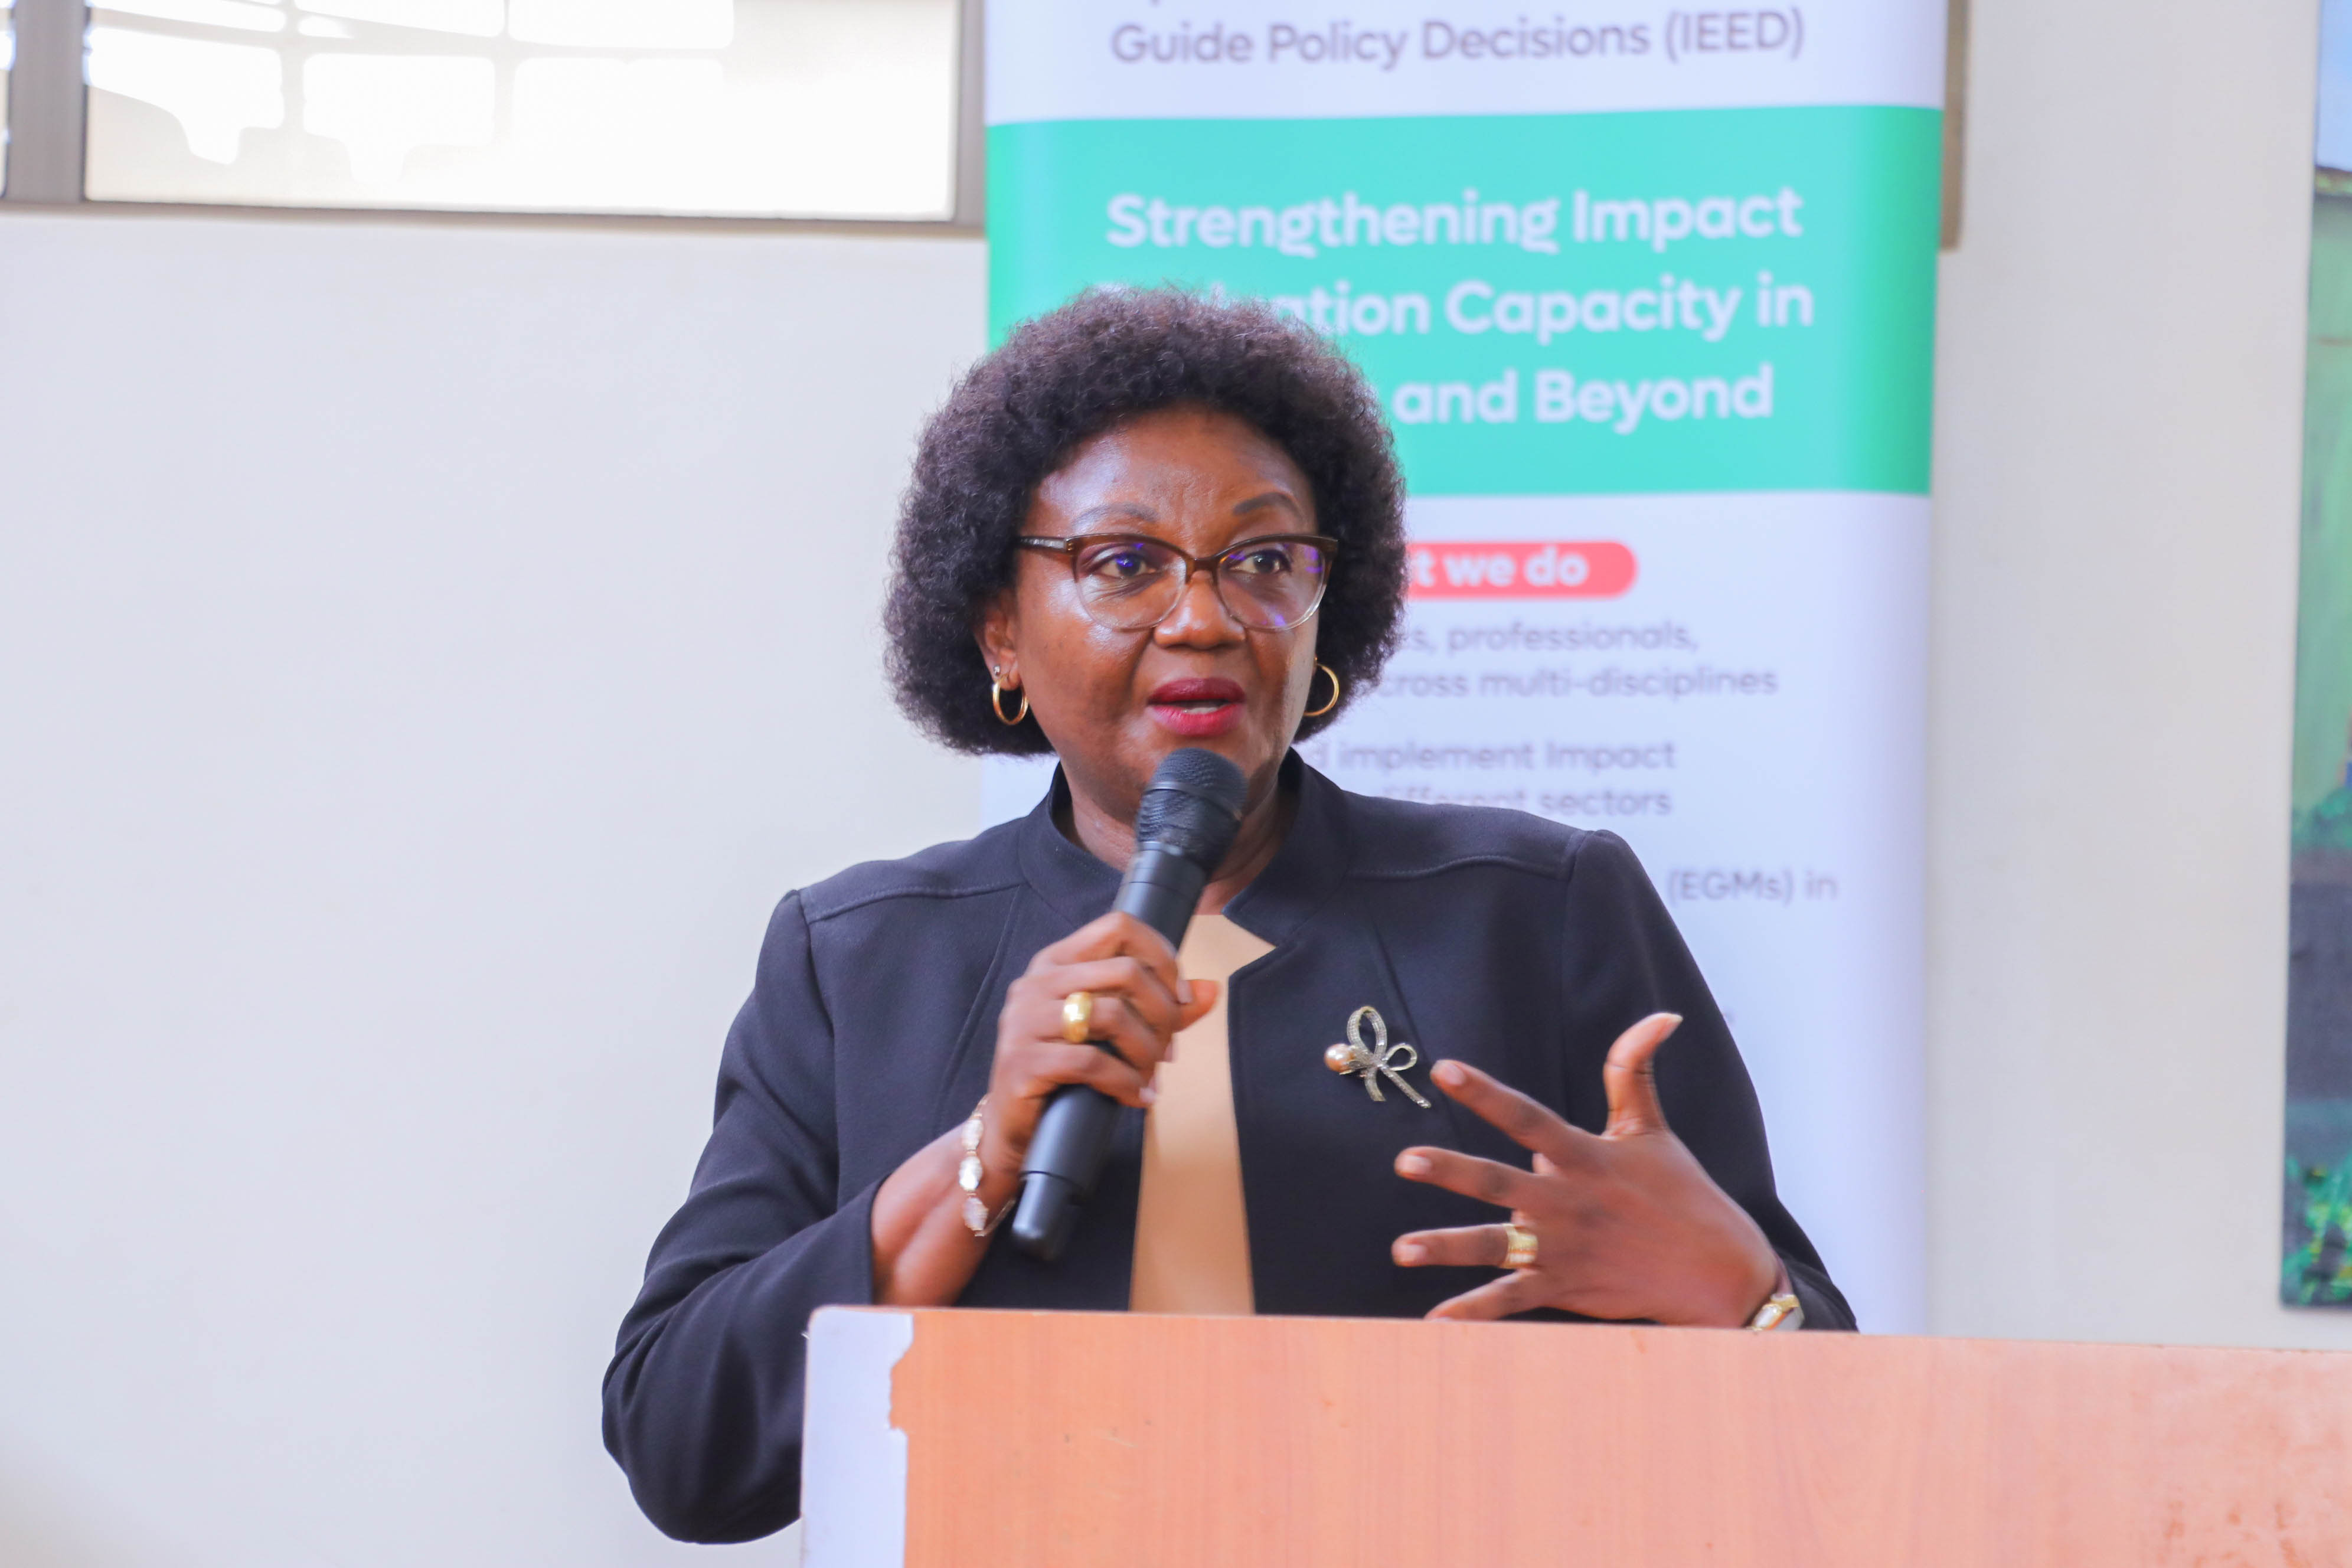 Prof. Rhoda Wanyenze, MakSPH Dean and IEED Project Lead during the training workshop